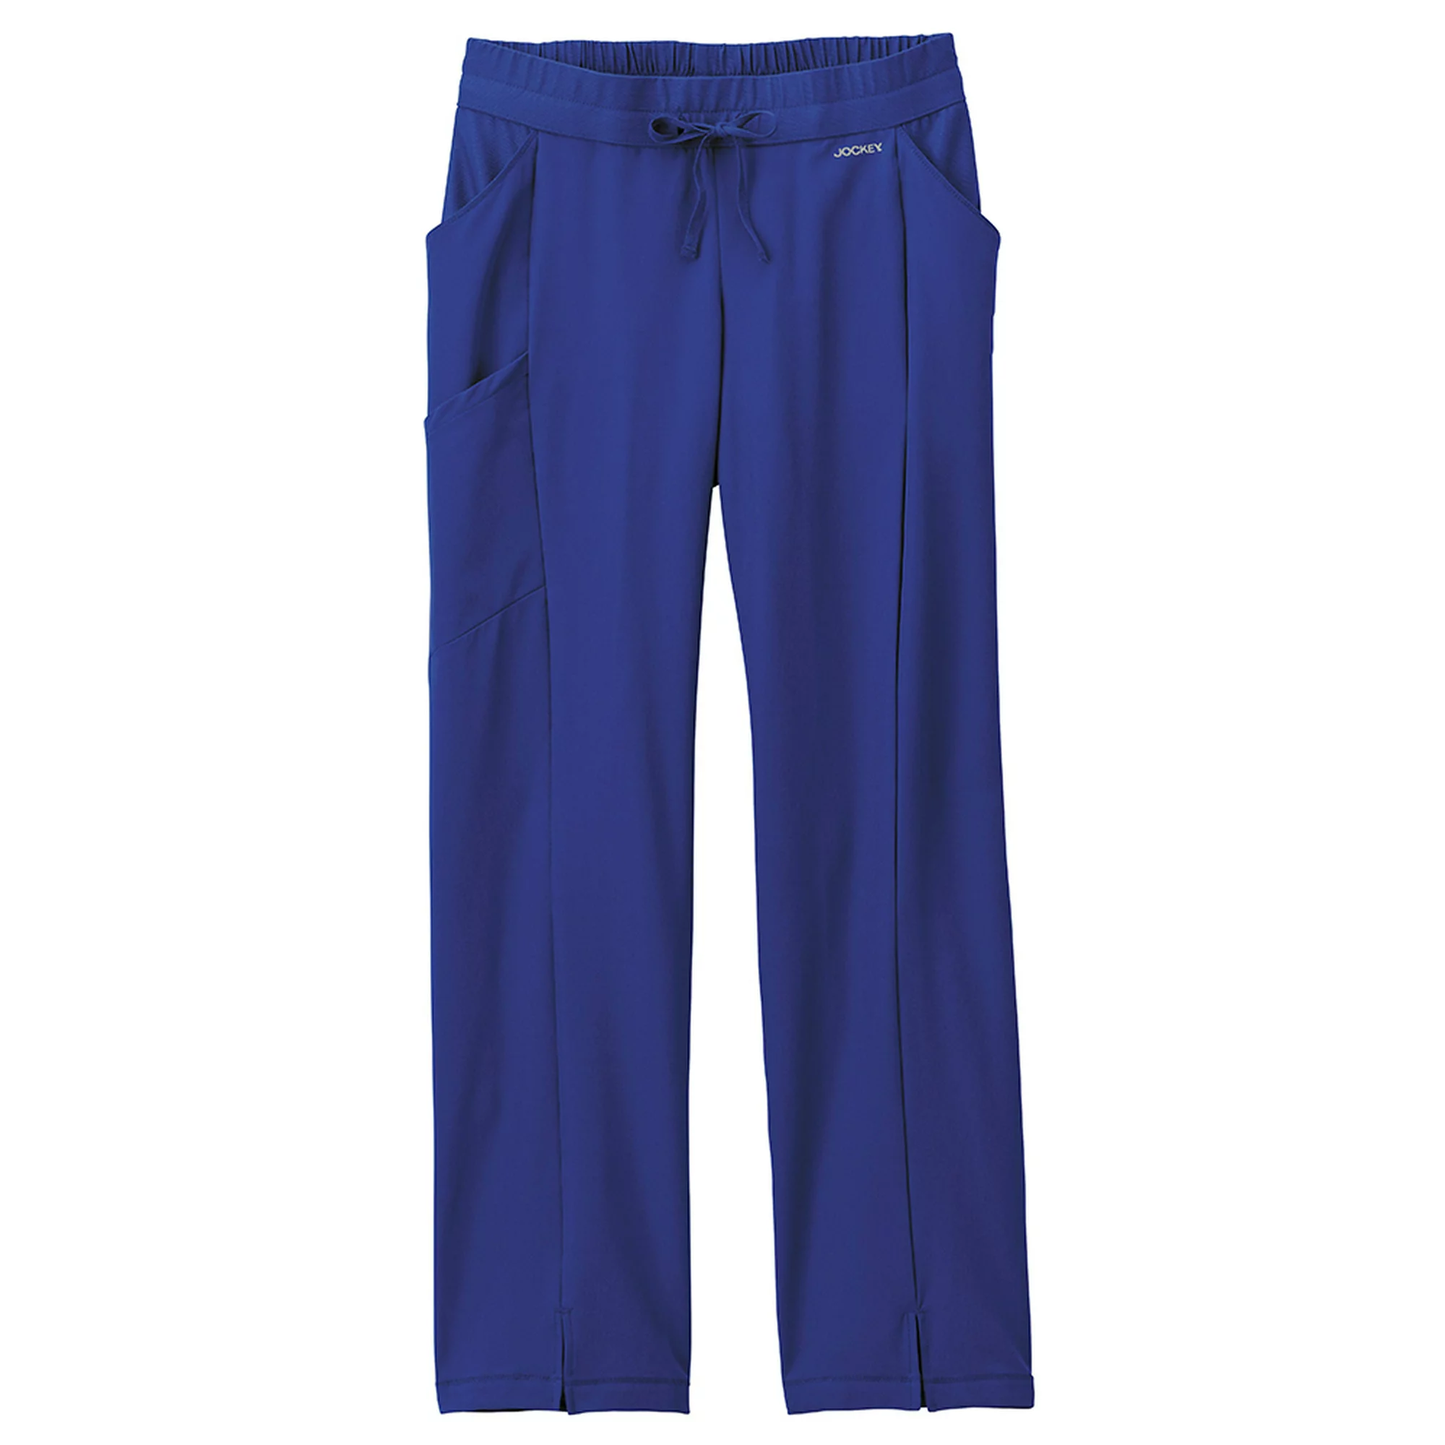 Clearance Jockey Performance Rx Get Up and Go Pants